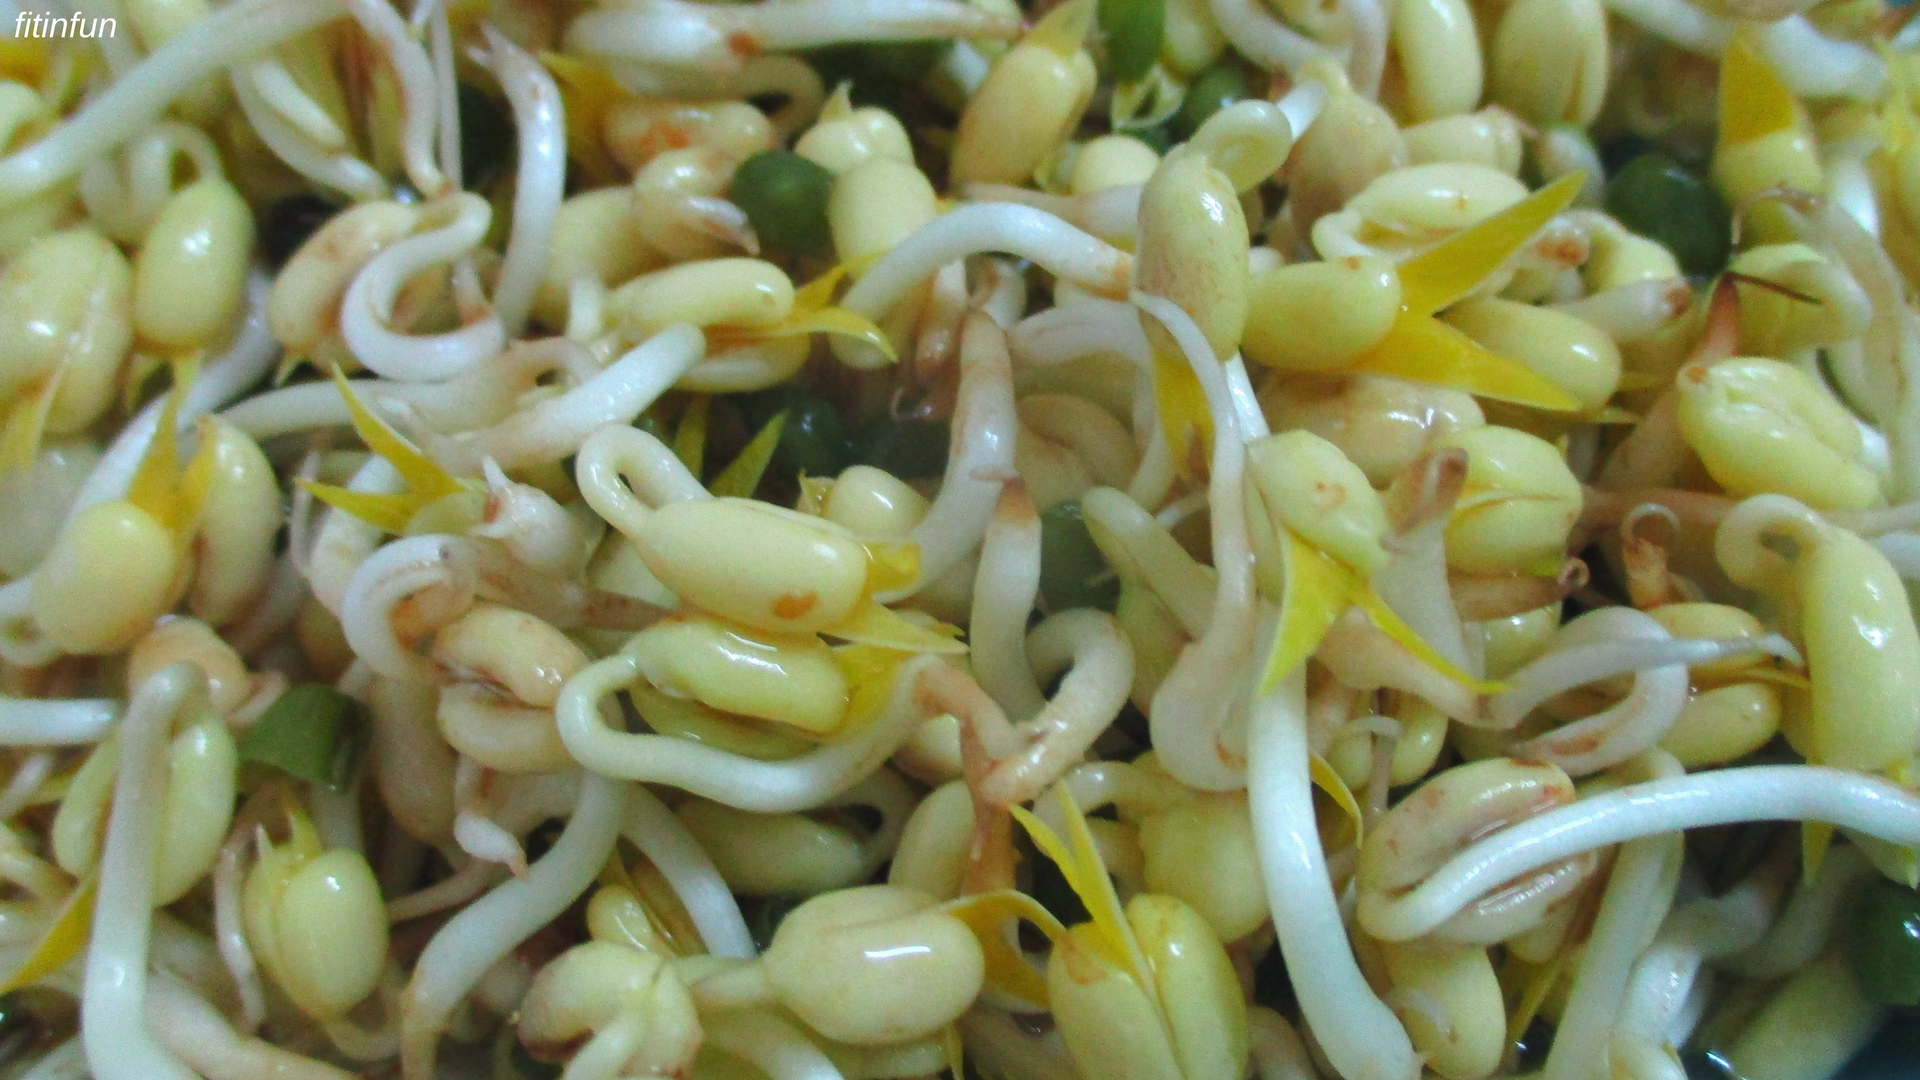 Sprouting Mung Beans after four days macro photography fitinfun.jpg